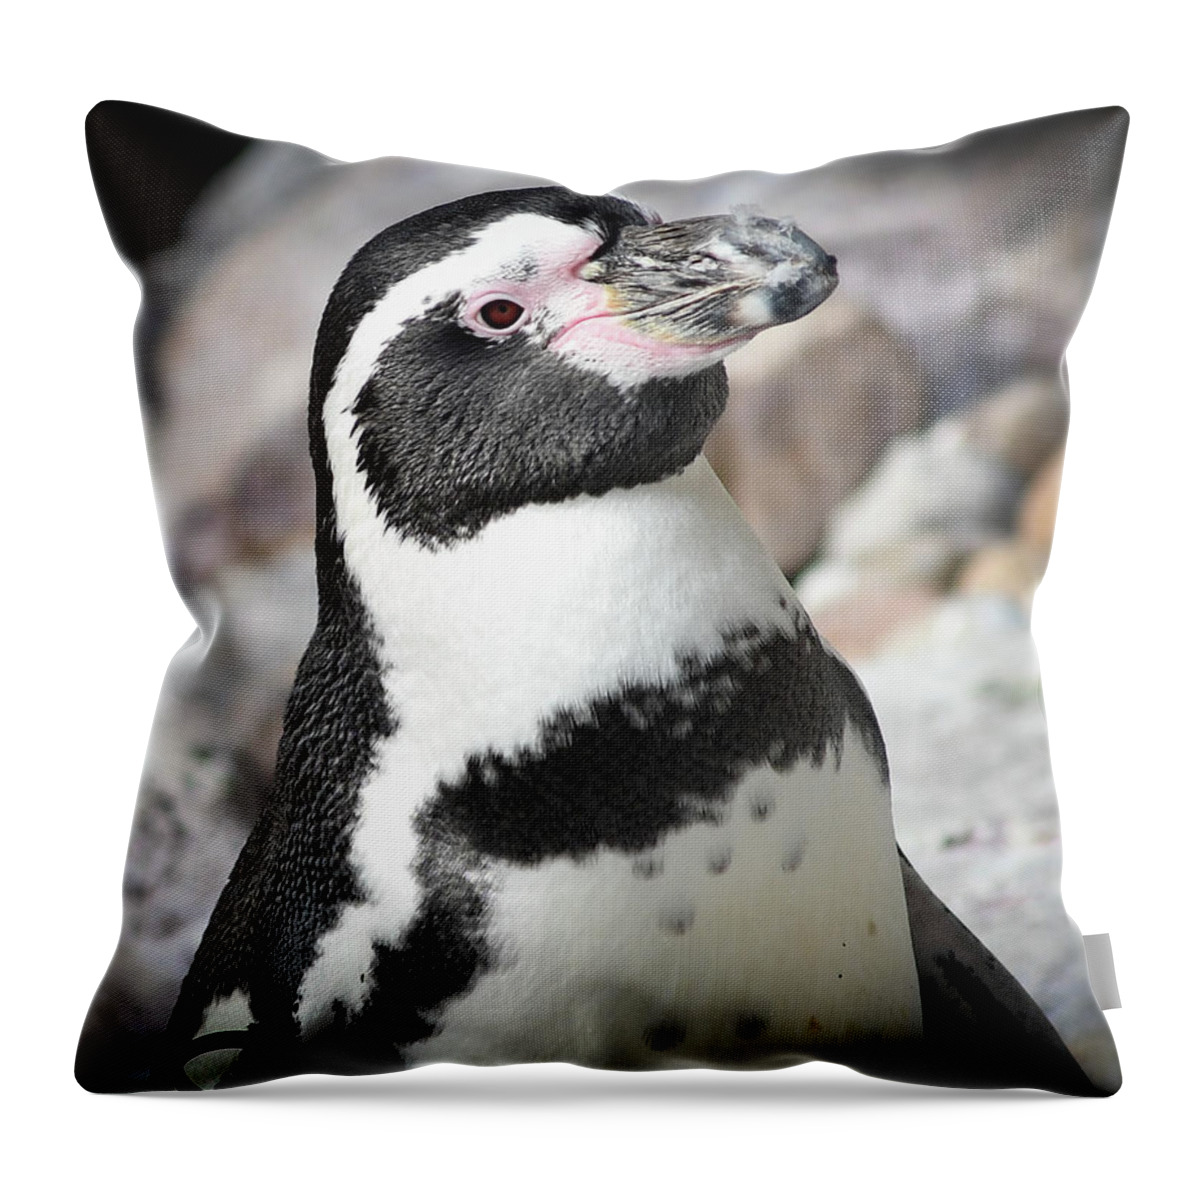 Penguin Throw Pillow featuring the photograph Cute Penguin by Michelle Wittensoldner